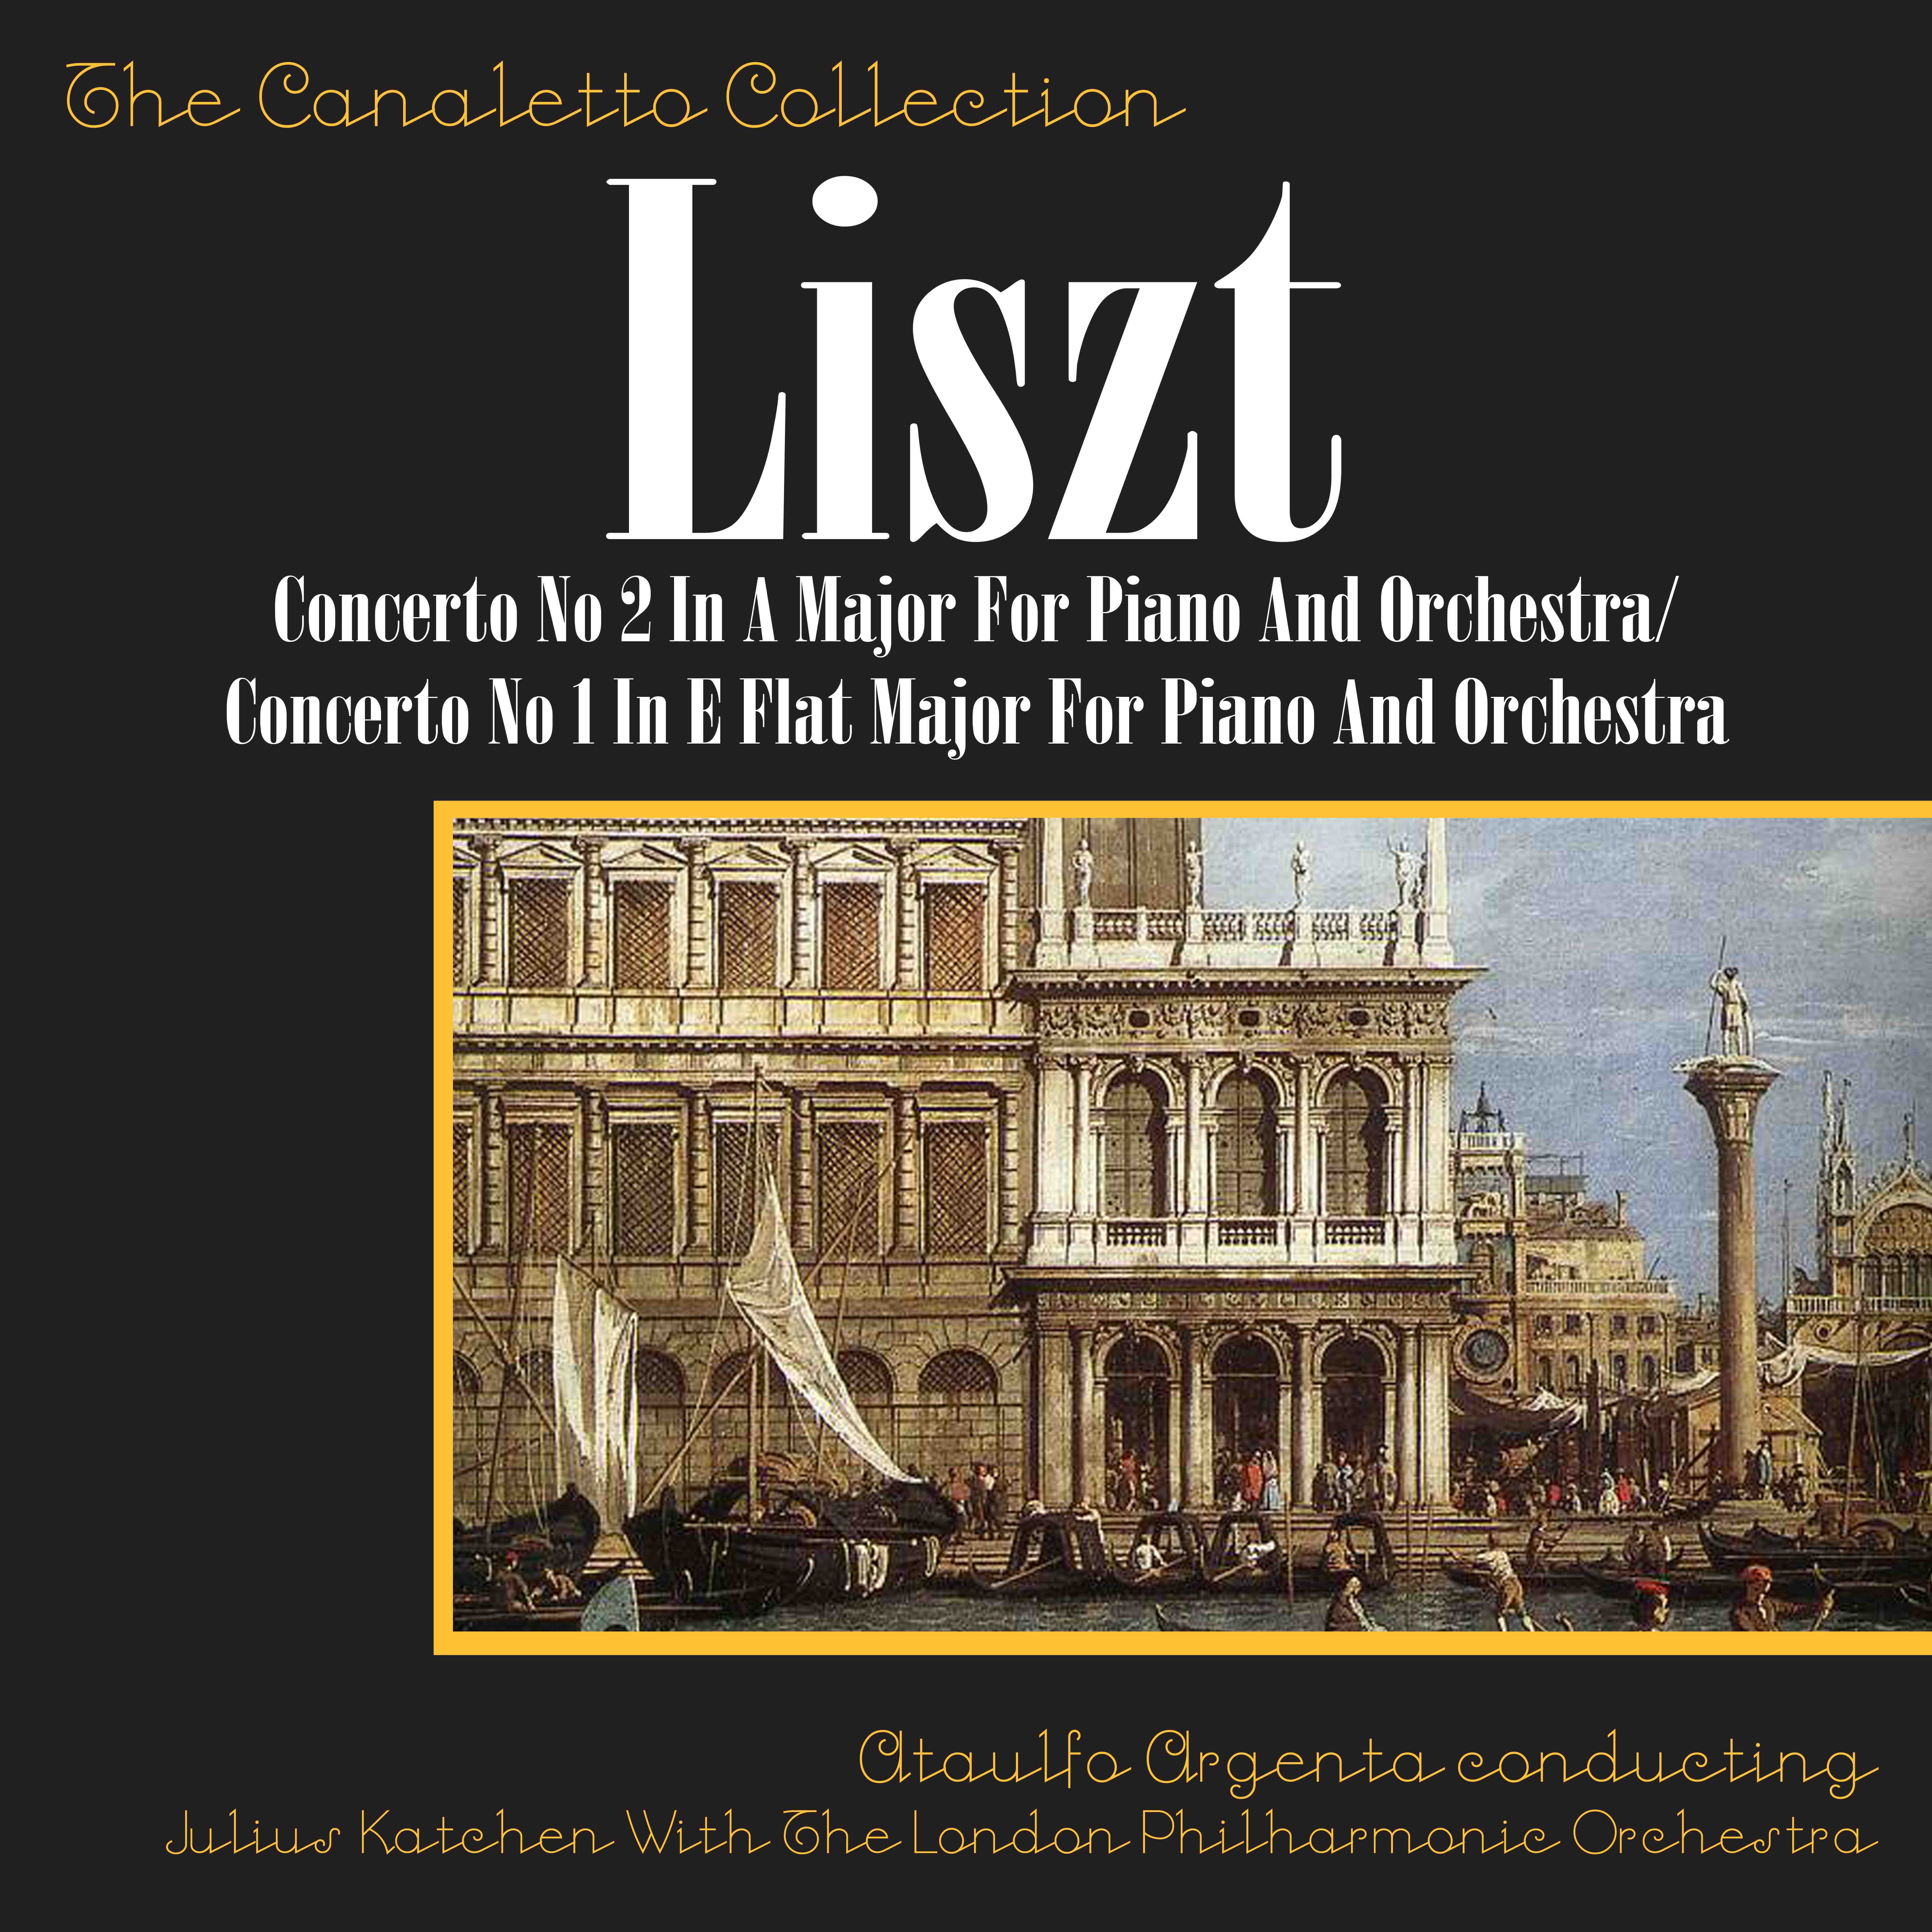 Concerto No 1 In E Flat Major For Piano And Orchestra - Third Movement: Allegro Vivace